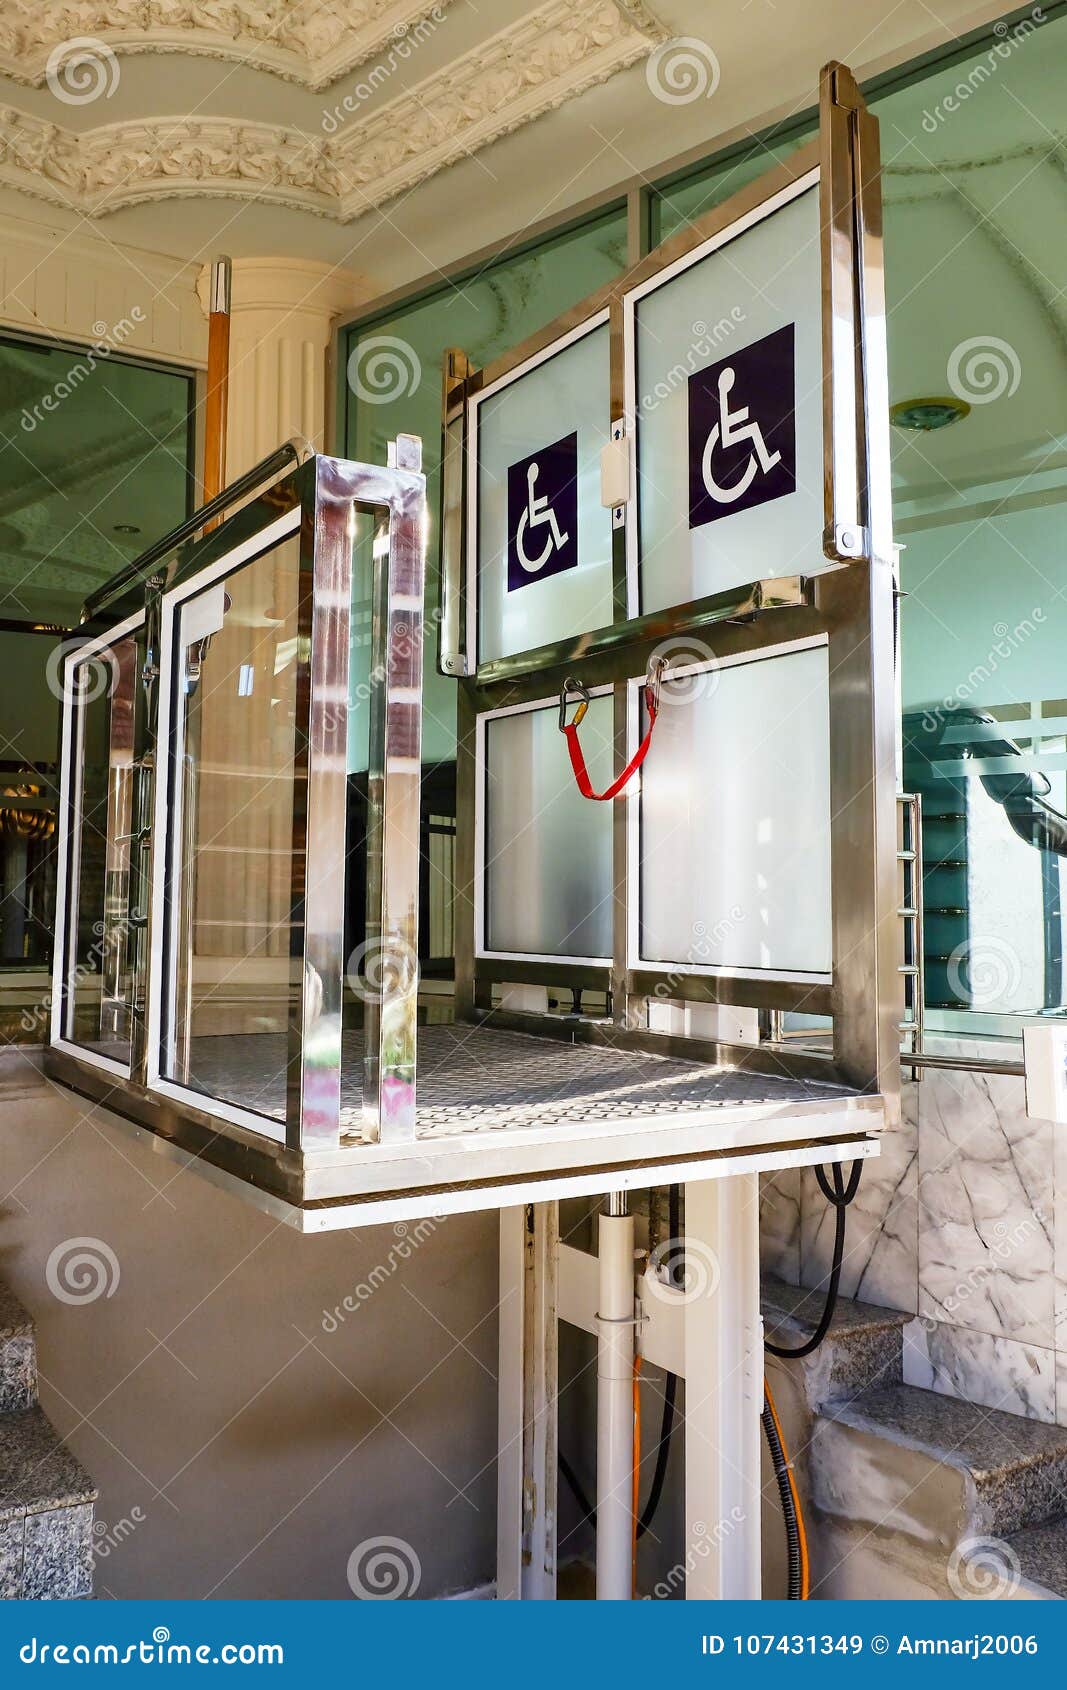 Lifts For The Disabled And Wheel Chair Stock Image Image